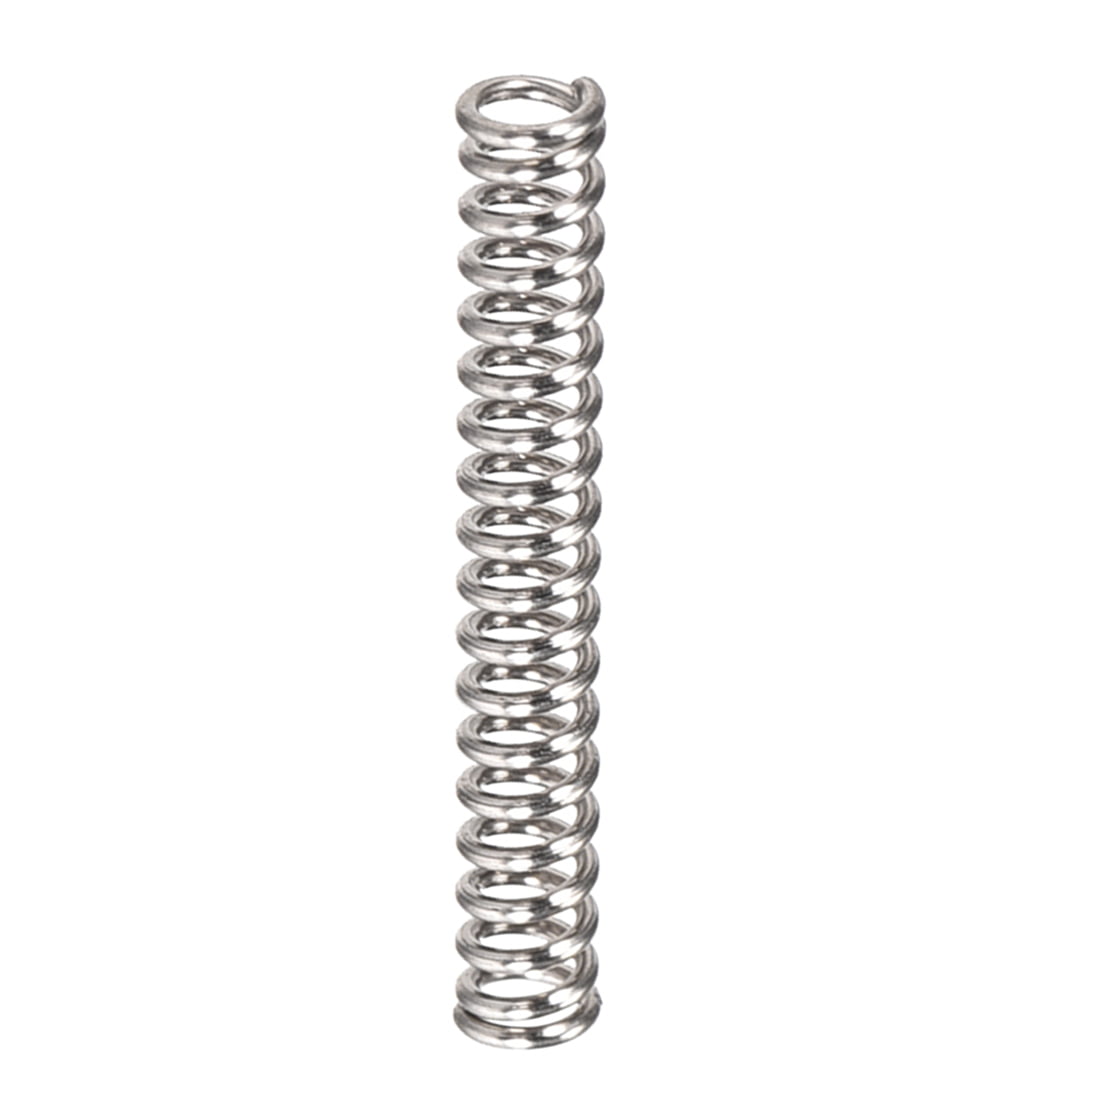 uxcell Compression Spring,304 Stainless Steel,3mm OD,0.5mm Wire Size,12mm Compressed Length,20mm Free Length,4N Load Capacity,Silver Tone,30pcs